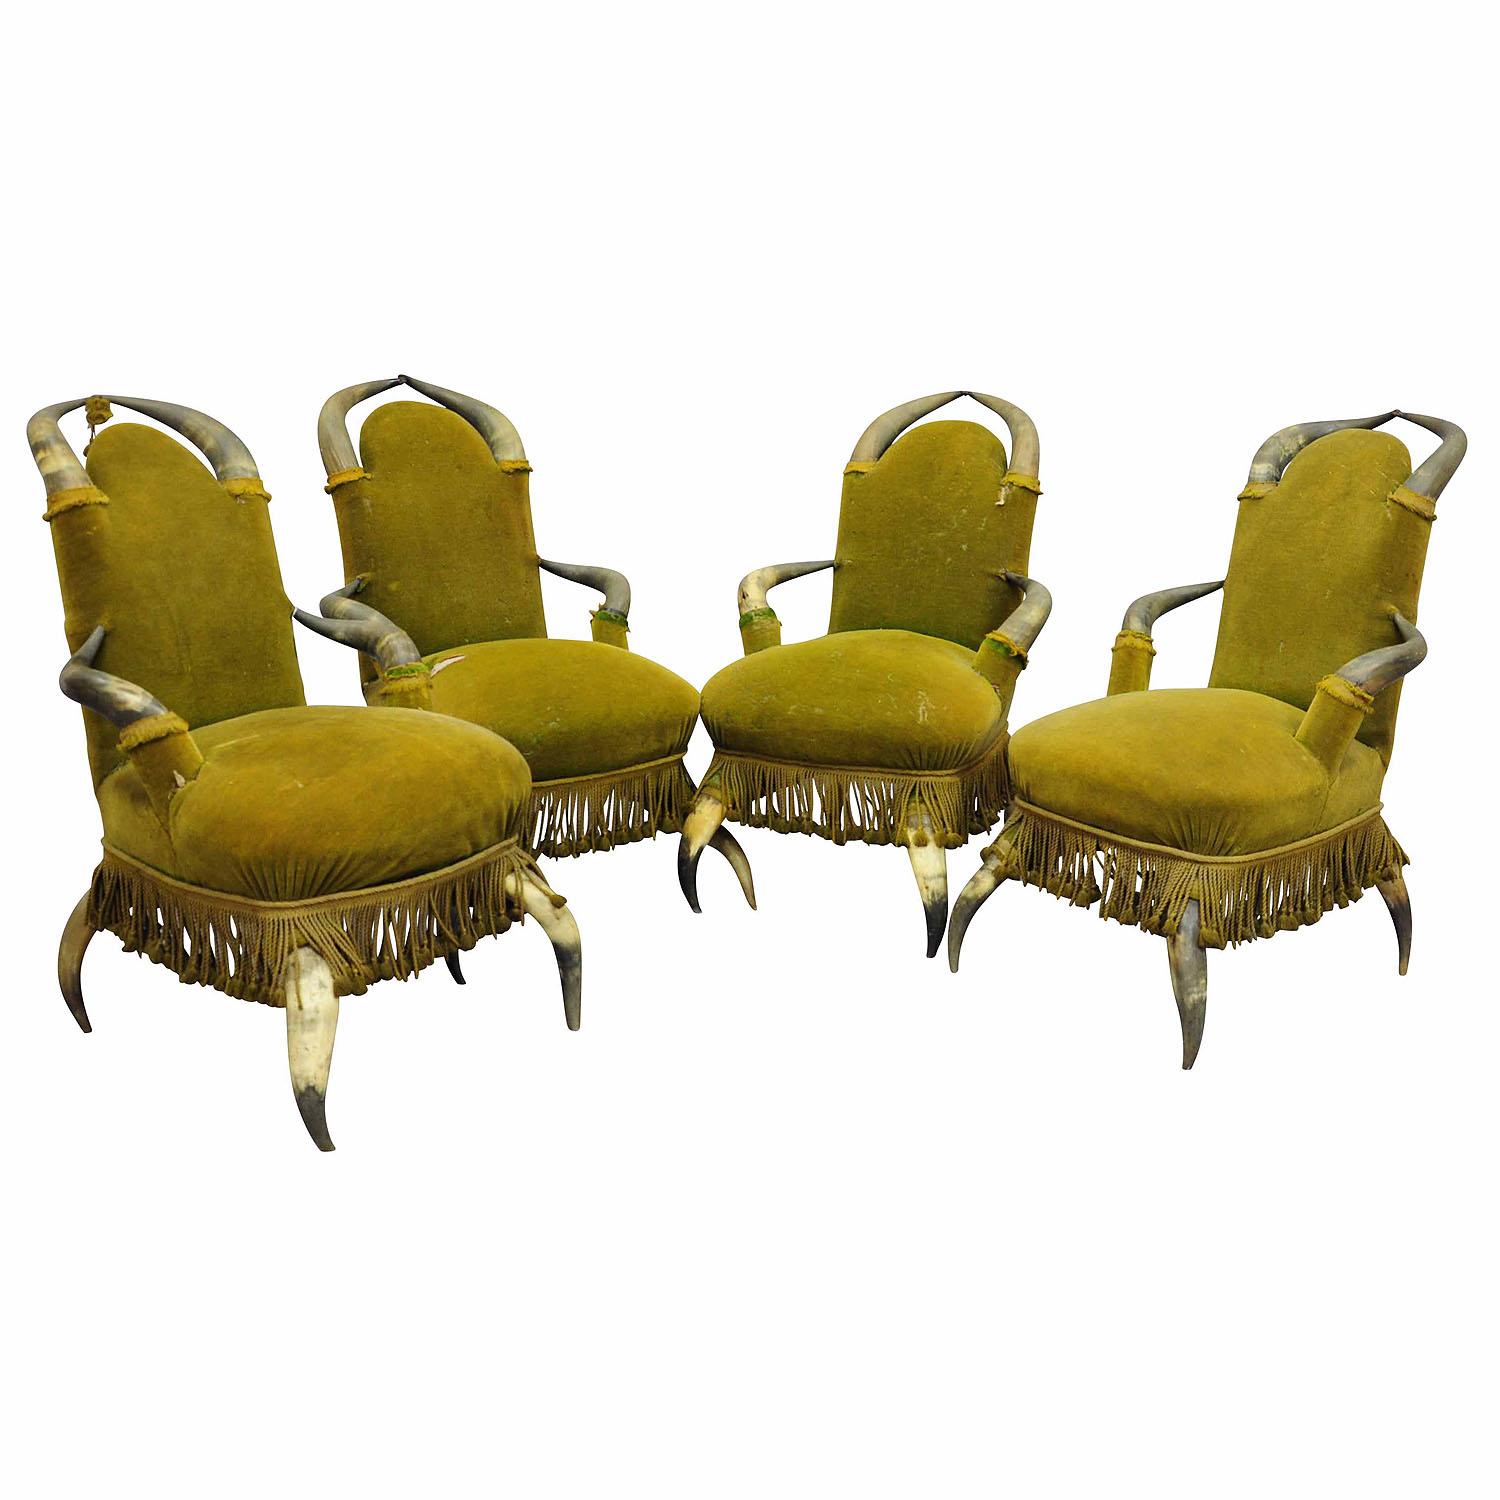 Four Antique Bull Horn Chairs ca. 1870

A set of four antique bull horn chairs ca. 1870, covered with antique green velvet which has to be renewed (is loosing the hairs). Manufactured in Austria ca. 1870.

Antler furniture have been one of the